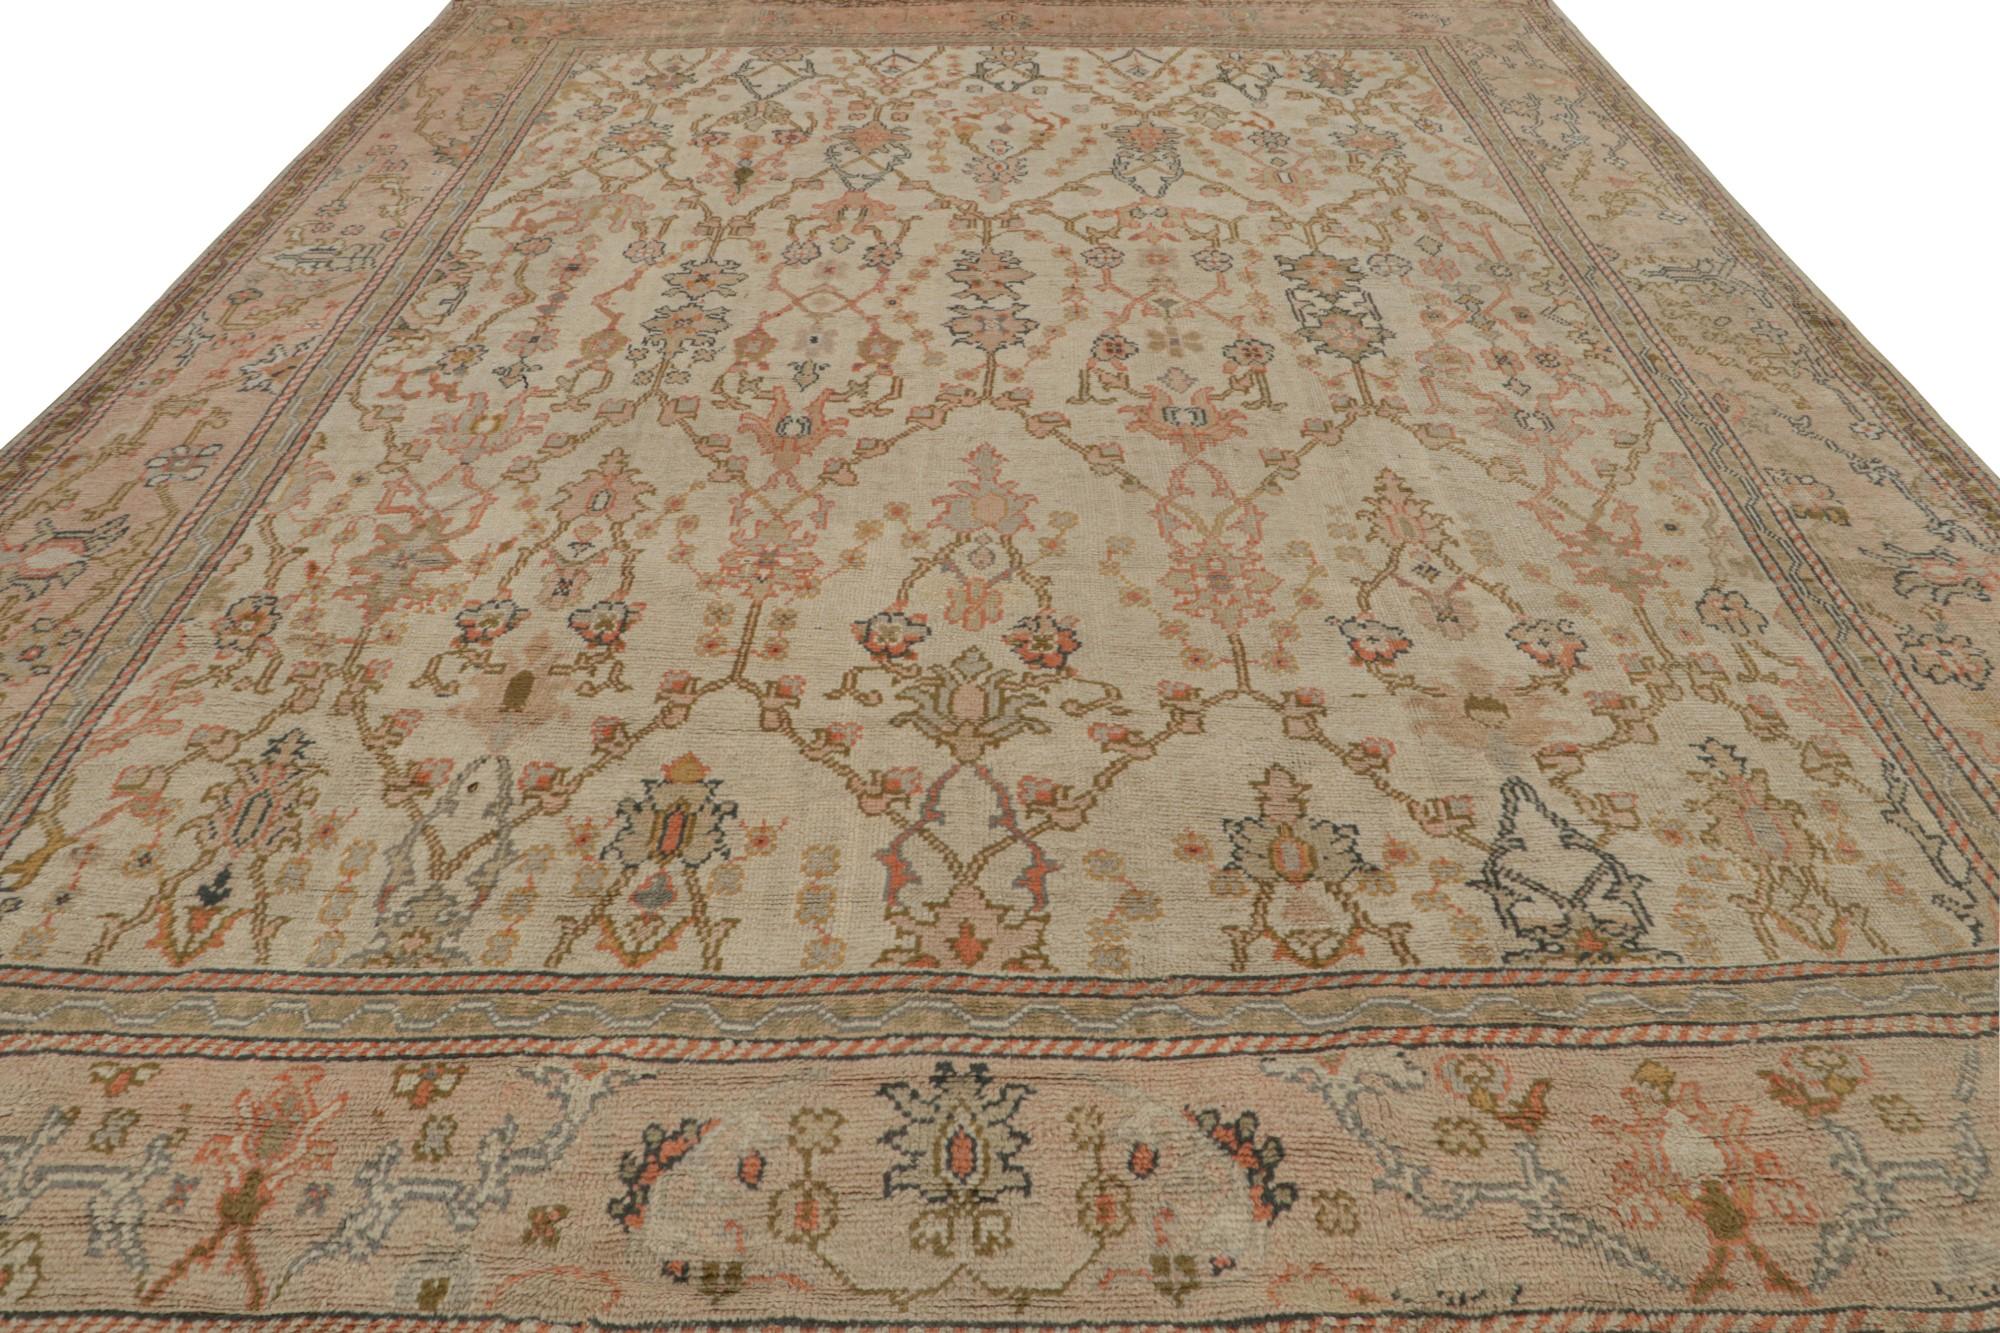 Turkish Antique Oushak Rug in Beige and Pink with Floral Patterns, from Rug & Kilim For Sale